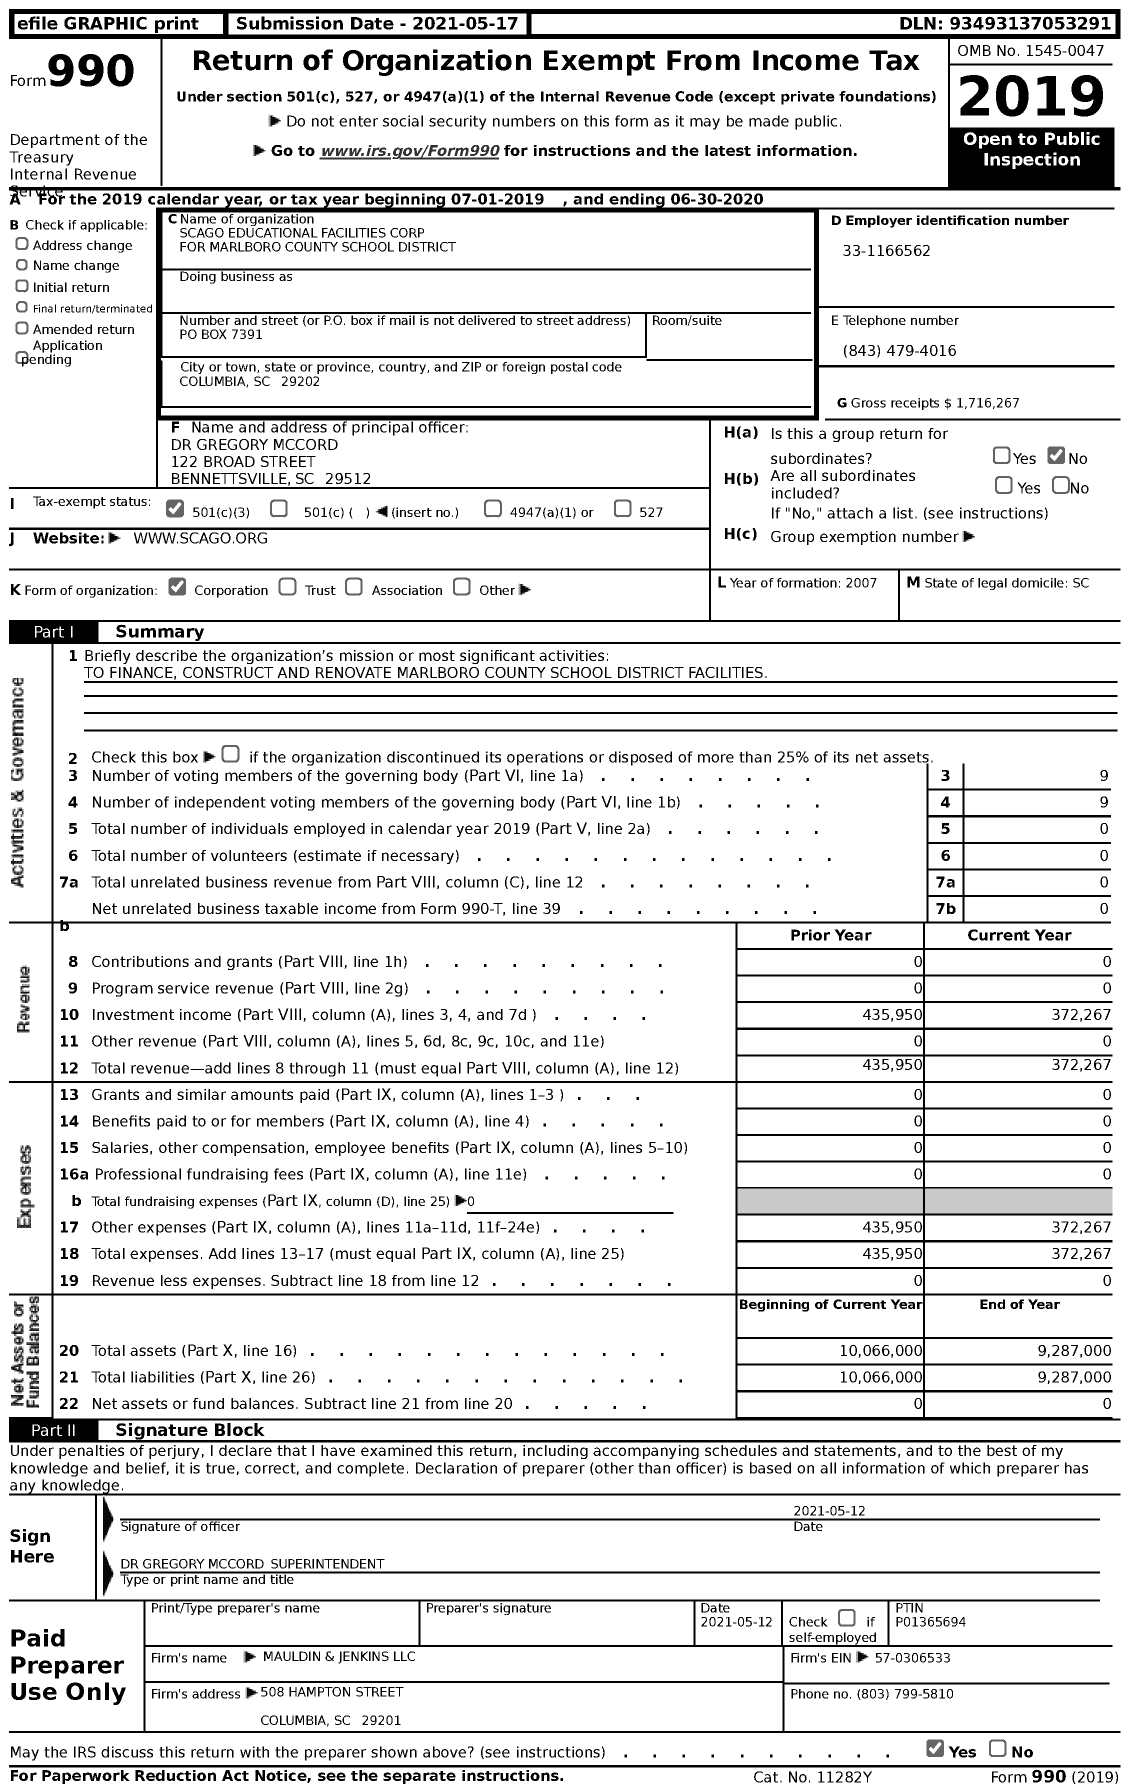 Image of first page of 2019 Form 990 for Scago Educational Facilities Corp for Marlboro County School District